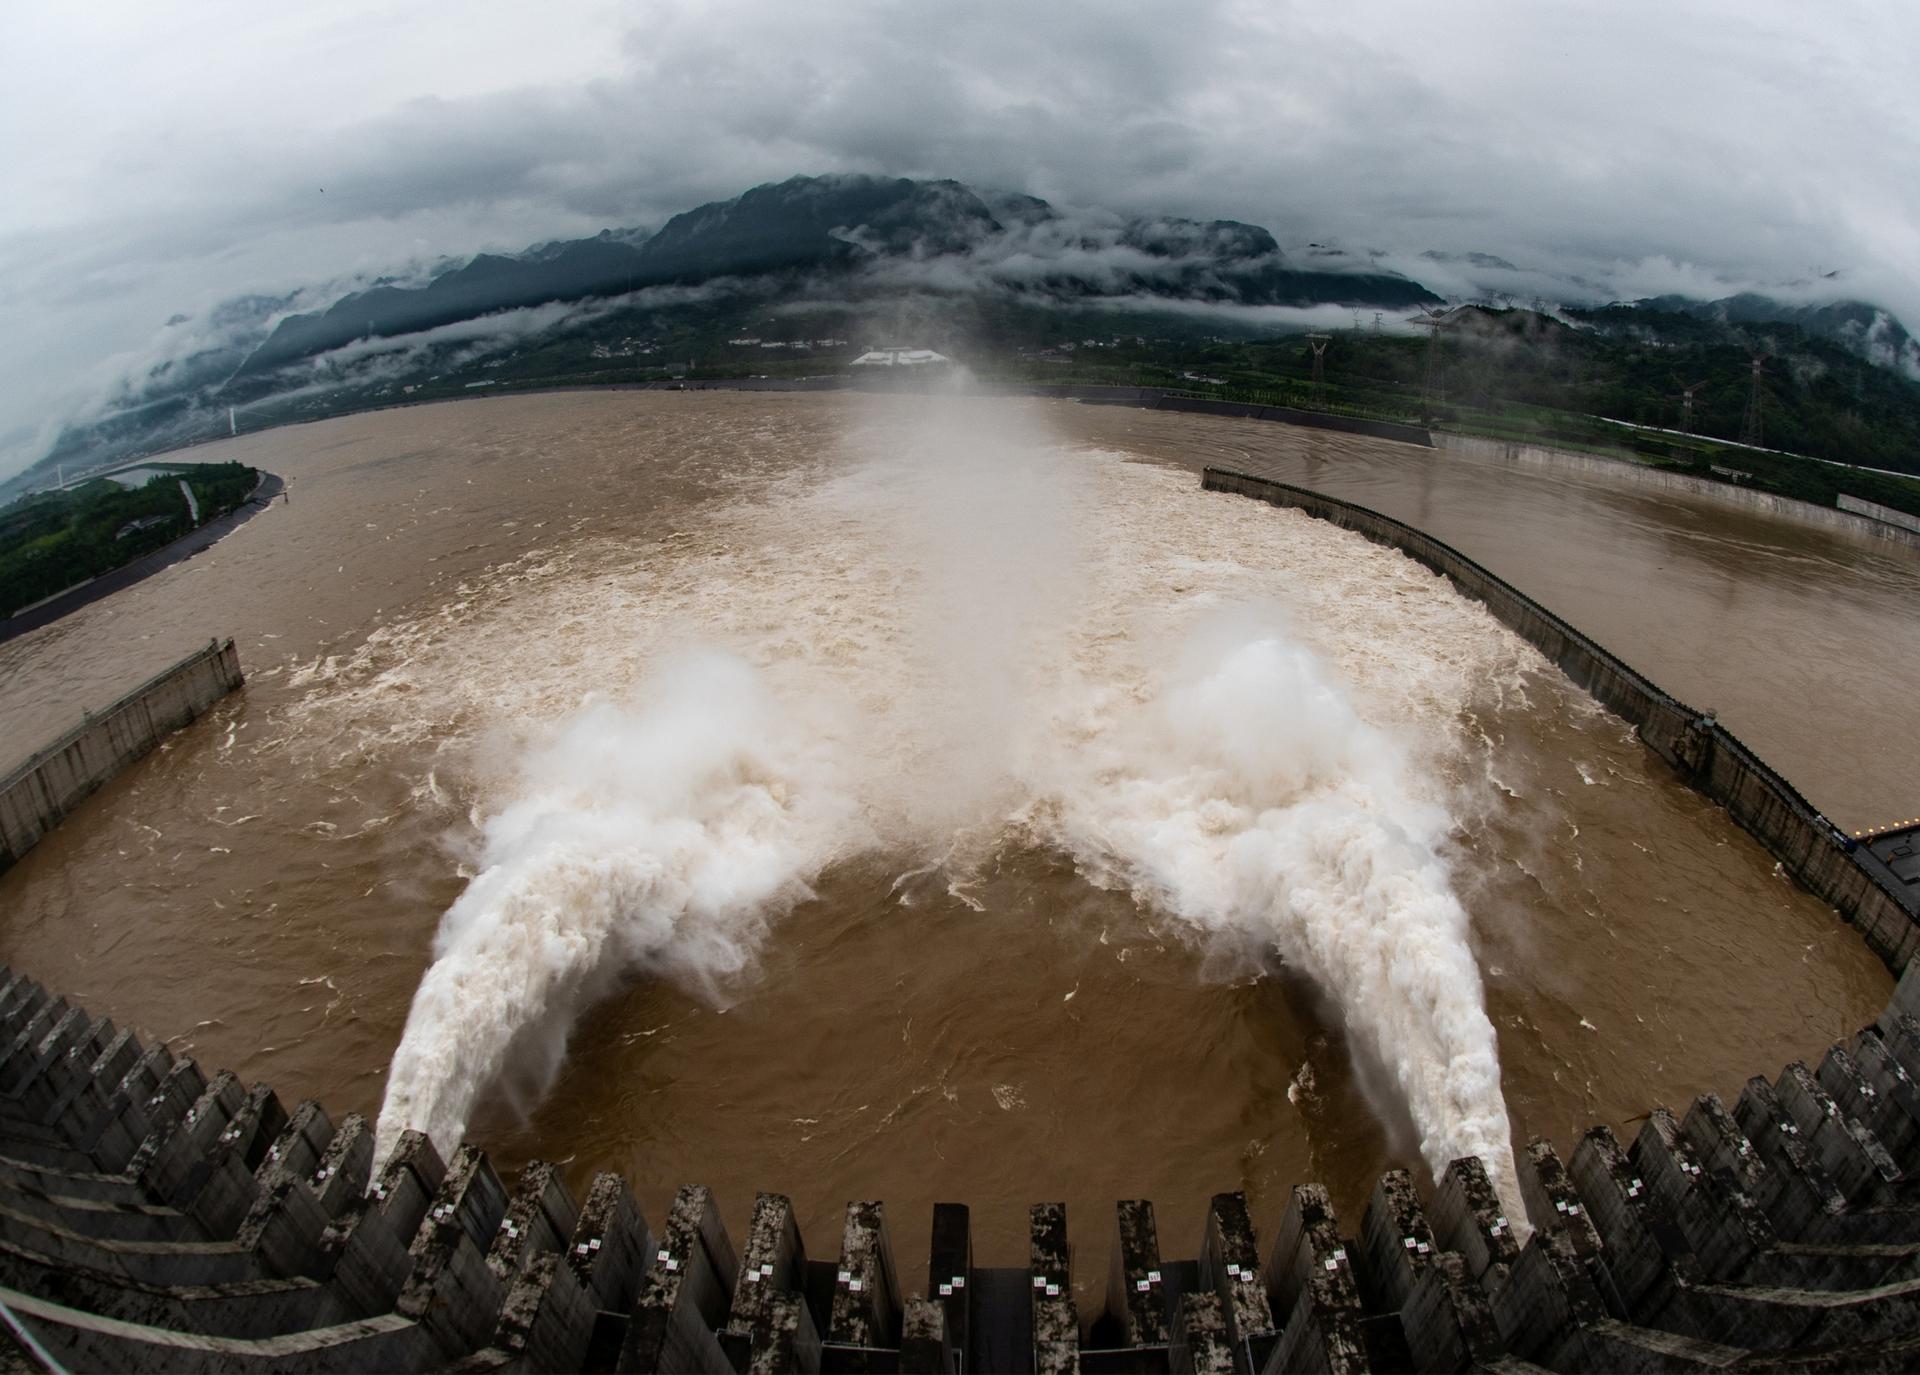 A gush of water discharges to lower water levels from the Three Gorges Dam